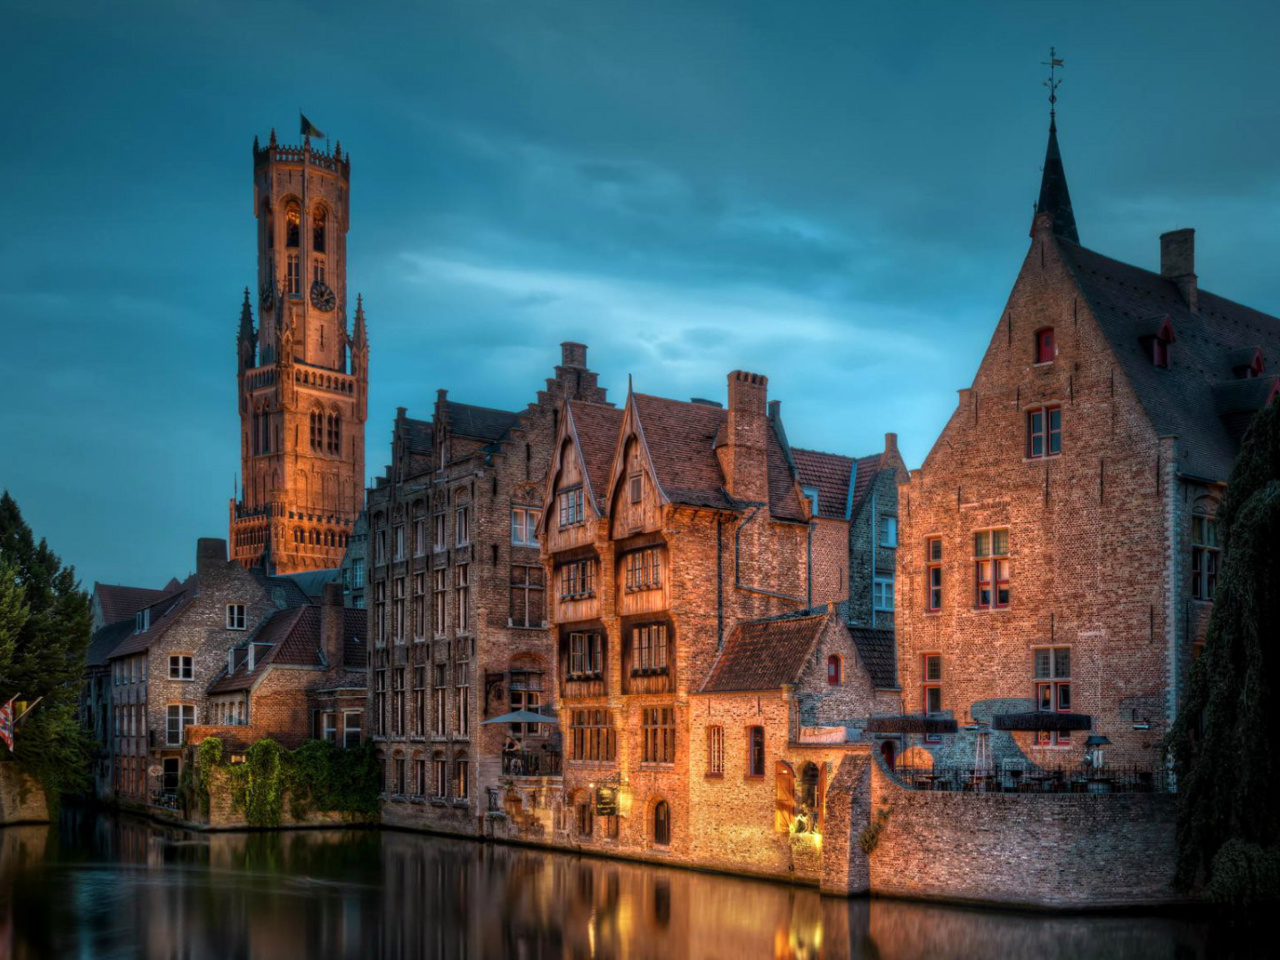 Das Bruges city on canal Wallpaper 1280x960